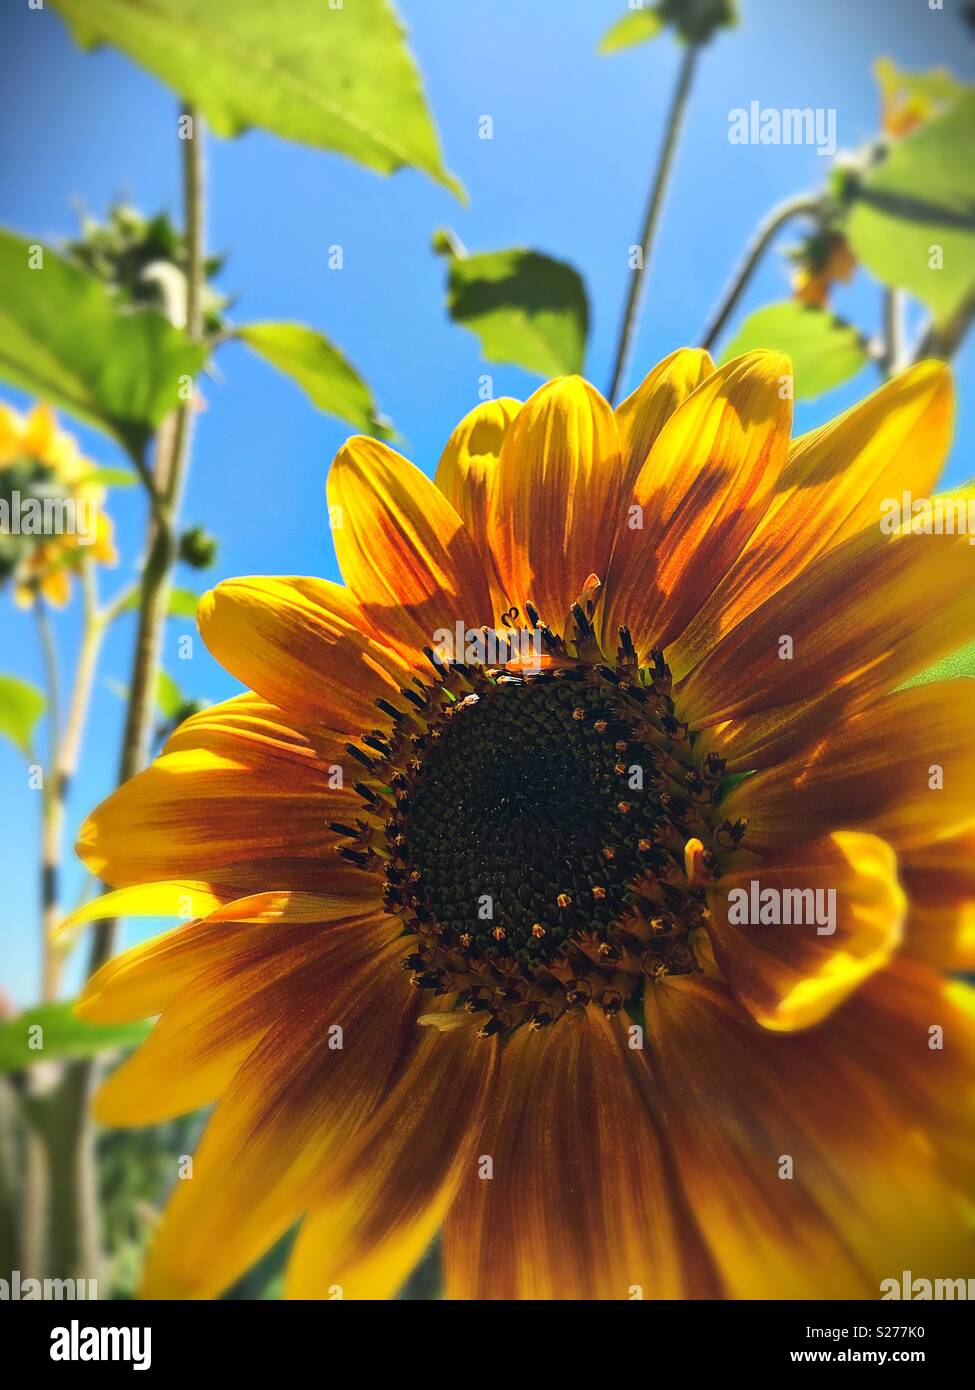 A close-up of a sunflower. Stock Photo